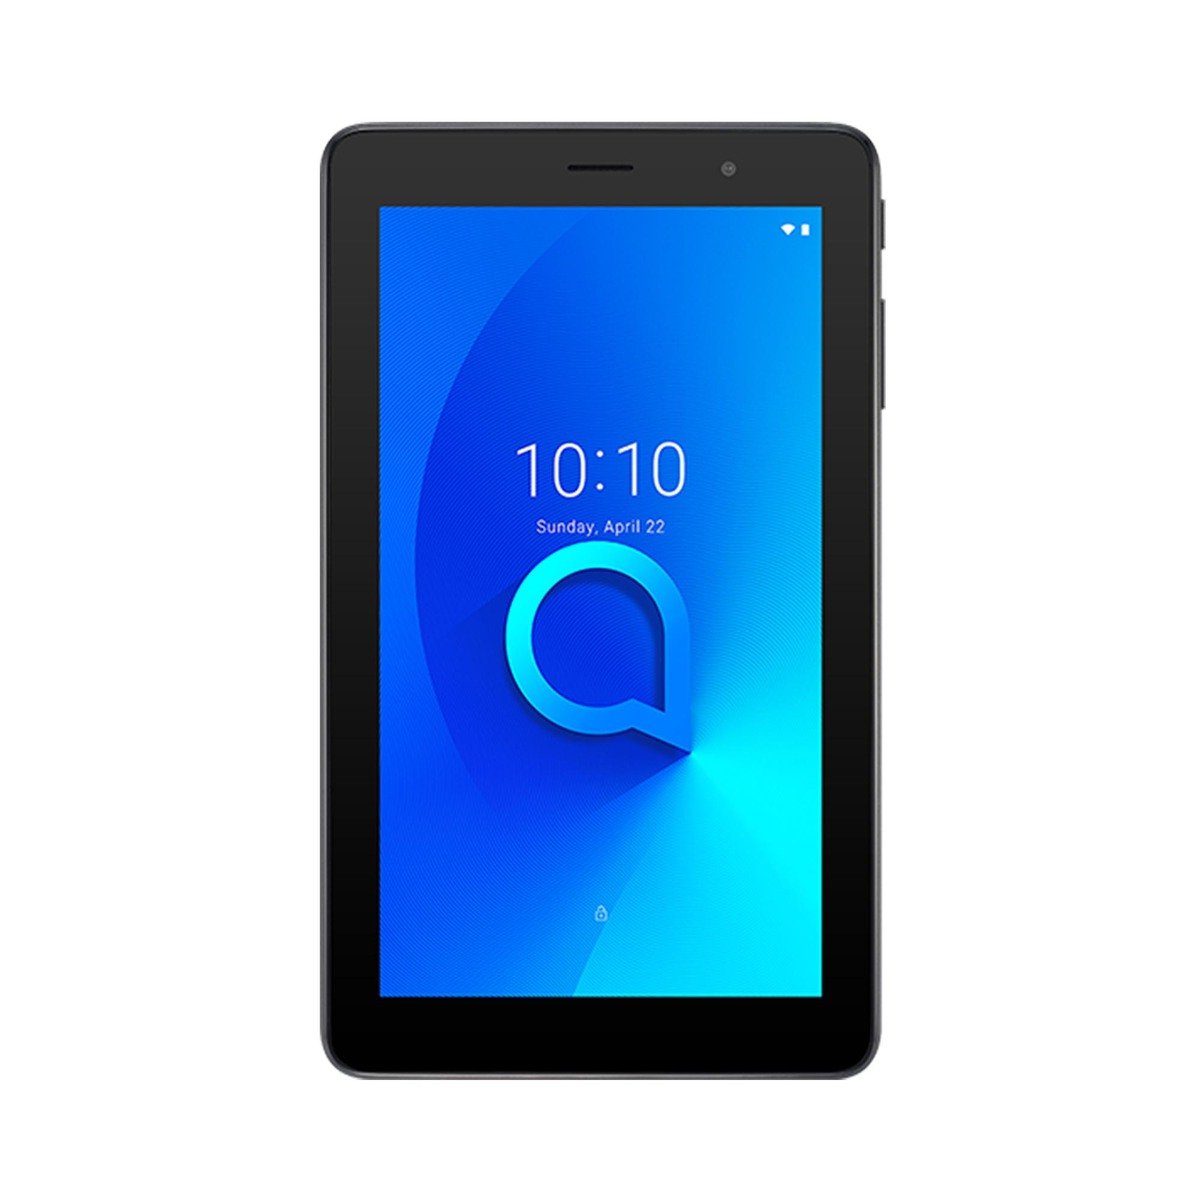 Alcatel Tablet 1T7-9009, Quad-core 1.3 GHZ Cortex-A7, 1GB RAM, 8GB Memory, 7.0 inches Display, Android 8.1 (Oreo), Bluish Black